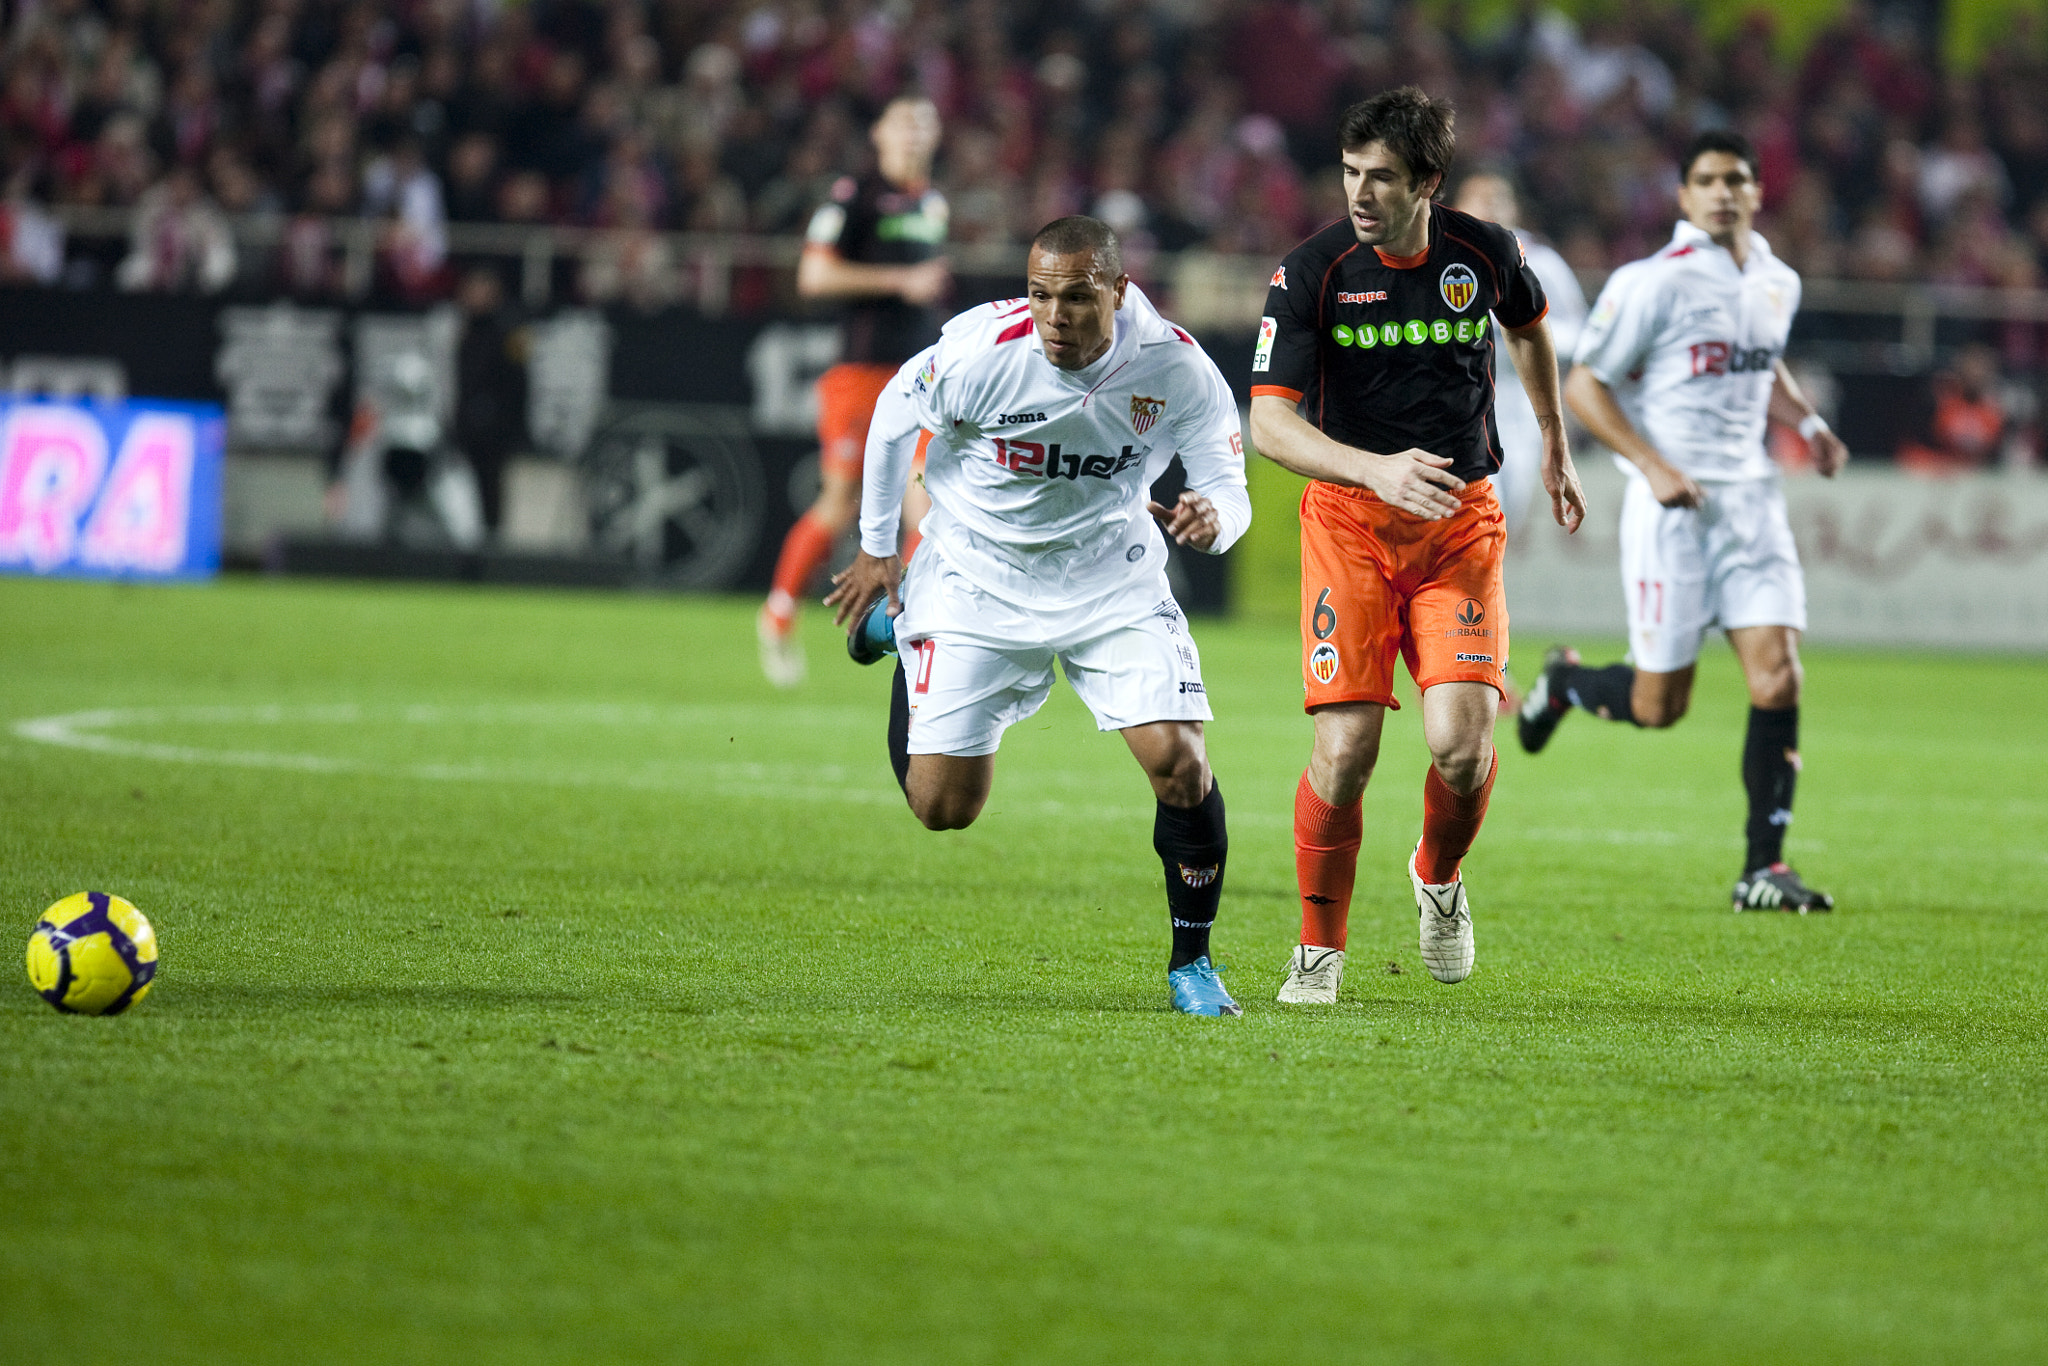 Luis Fabiano trying to reach the ball. Spanish Liga game between Sevilla FC and Valencia CF. Sanchez